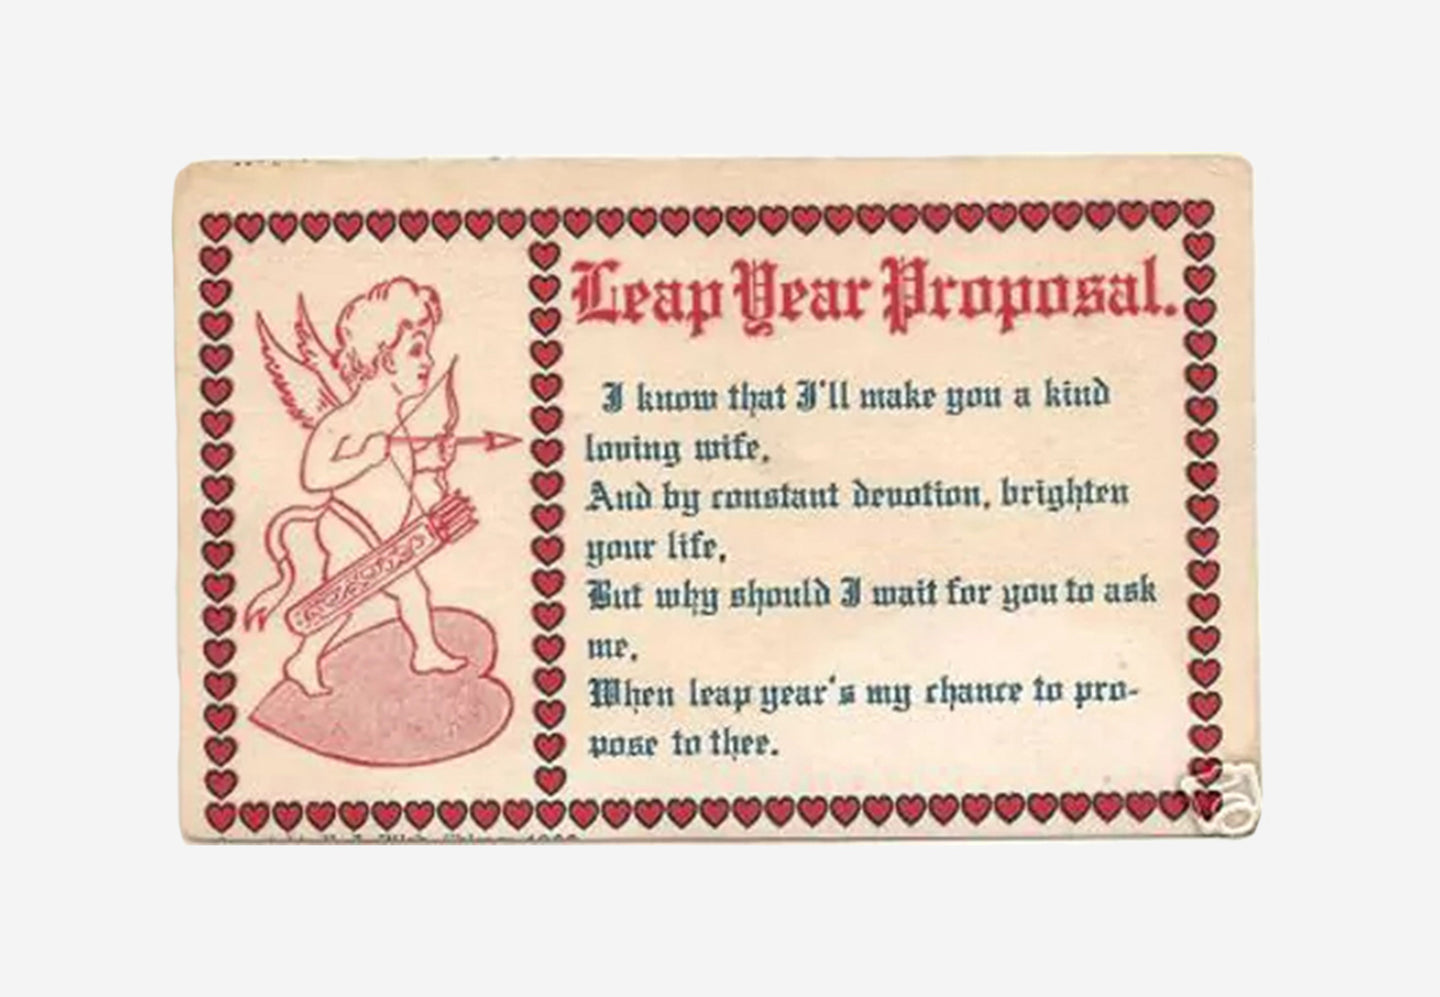 F.J. Bilek's 1908 Leap Year Proposal postcard with Cupid illustration and poem